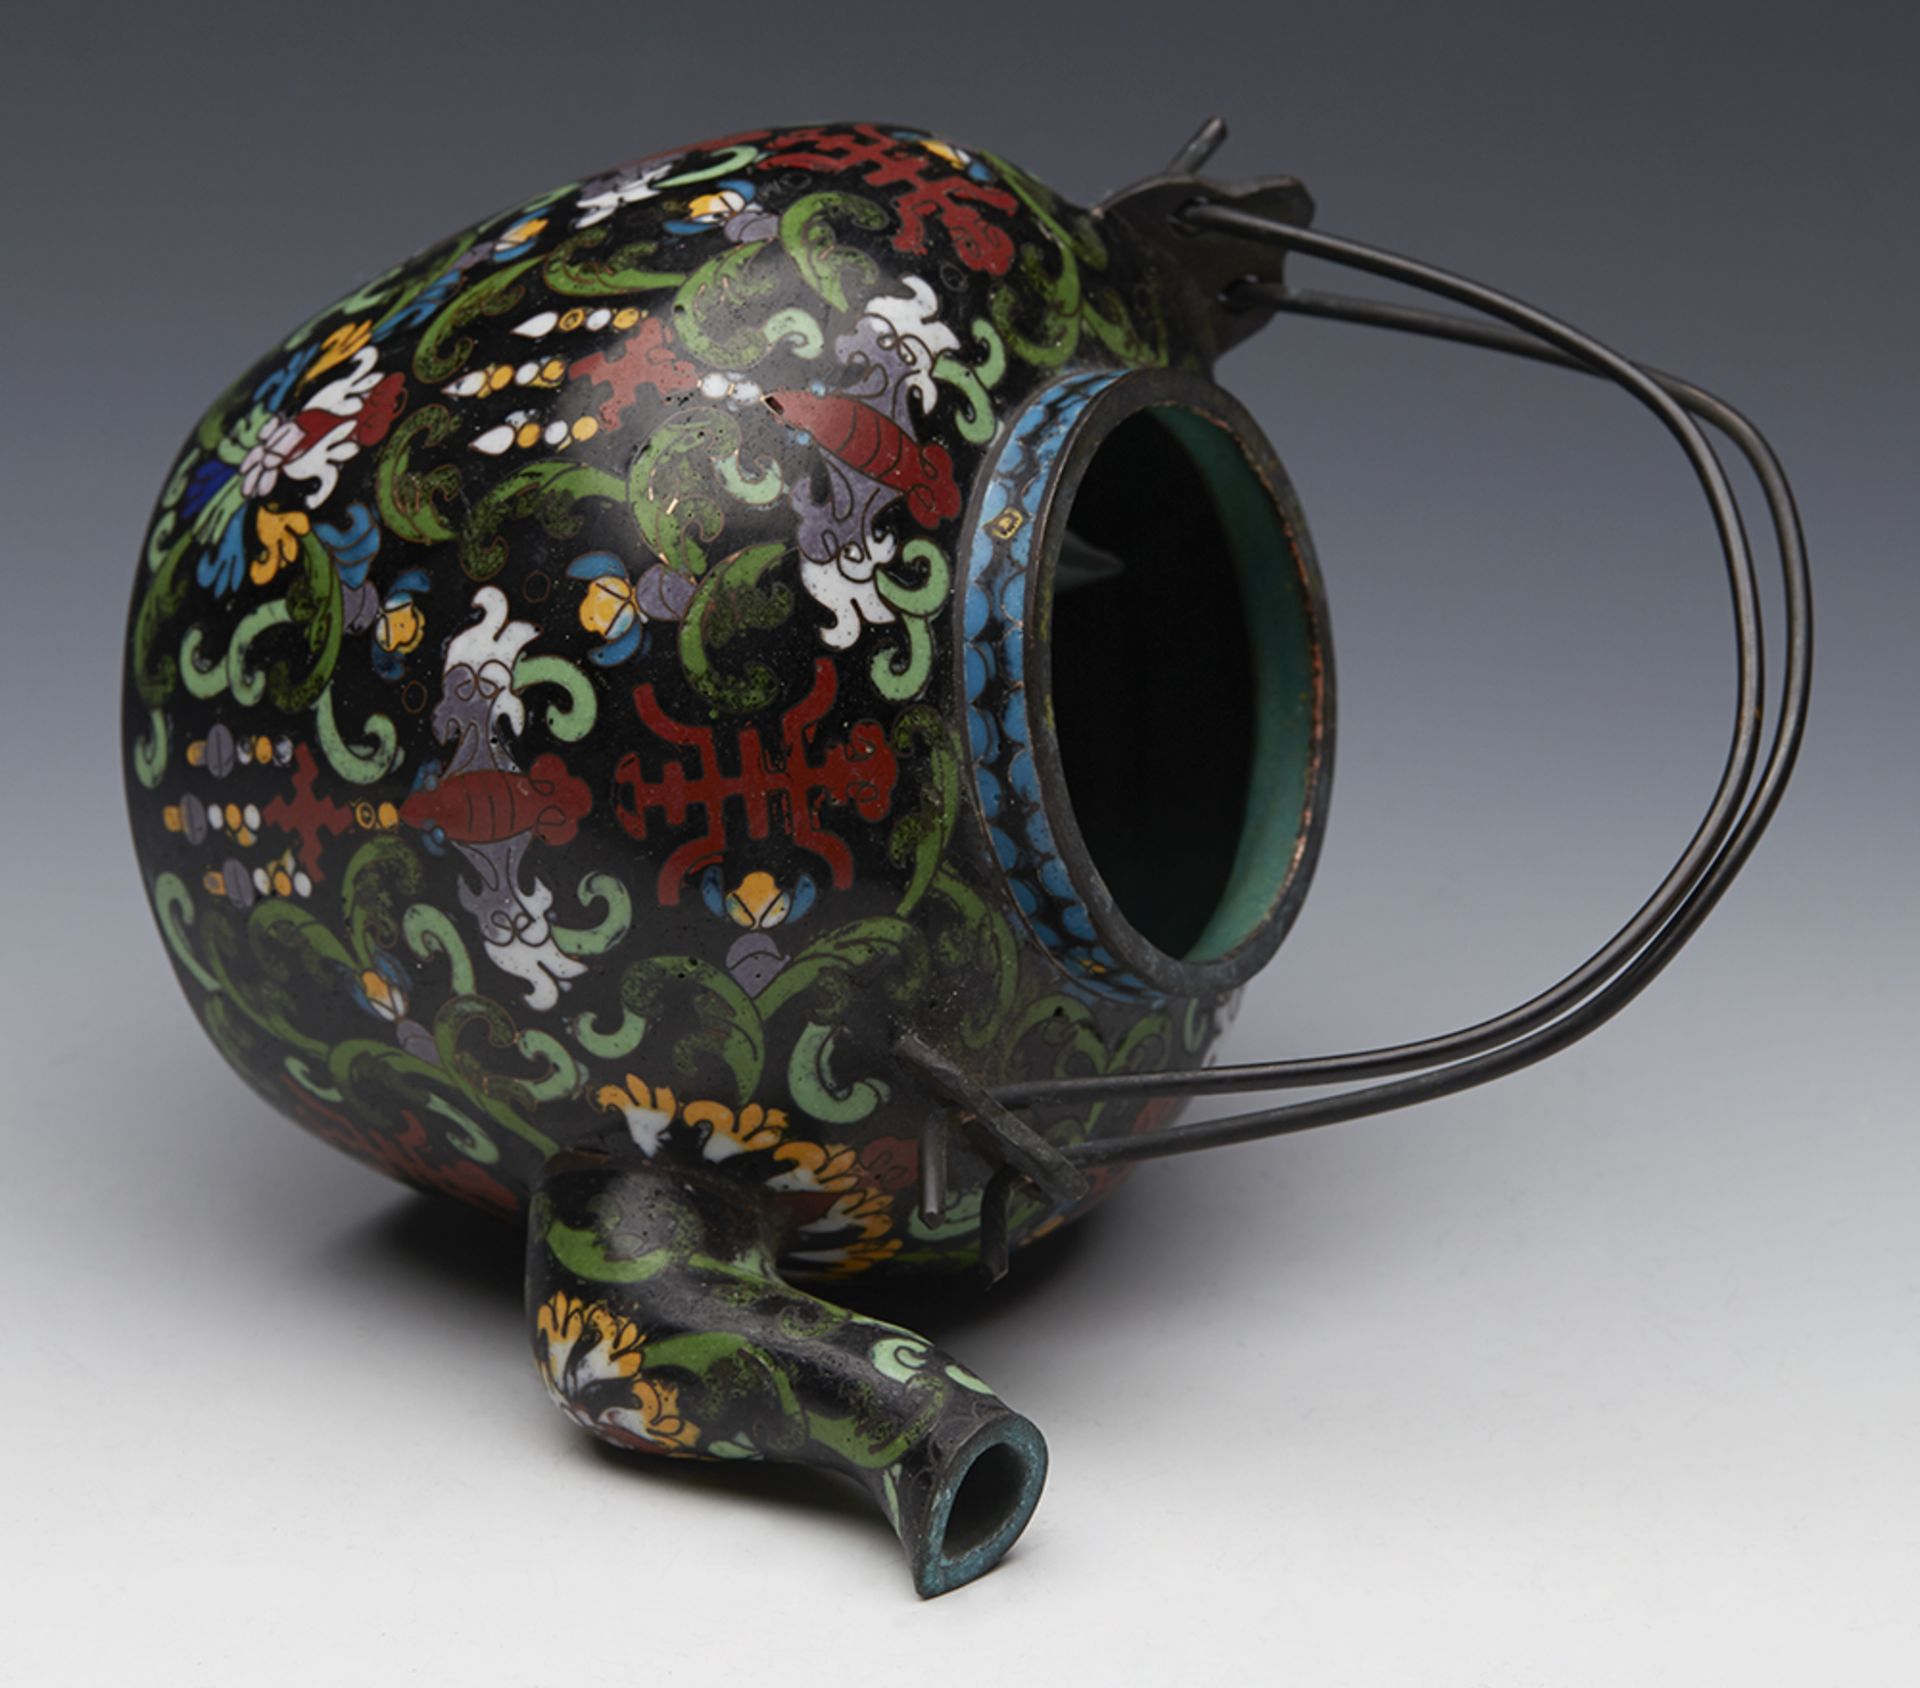 Fine Antique Chinese Qing Cloisonne Wine Pot Marked Tong Shun Tang 19Th C. - Image 3 of 10